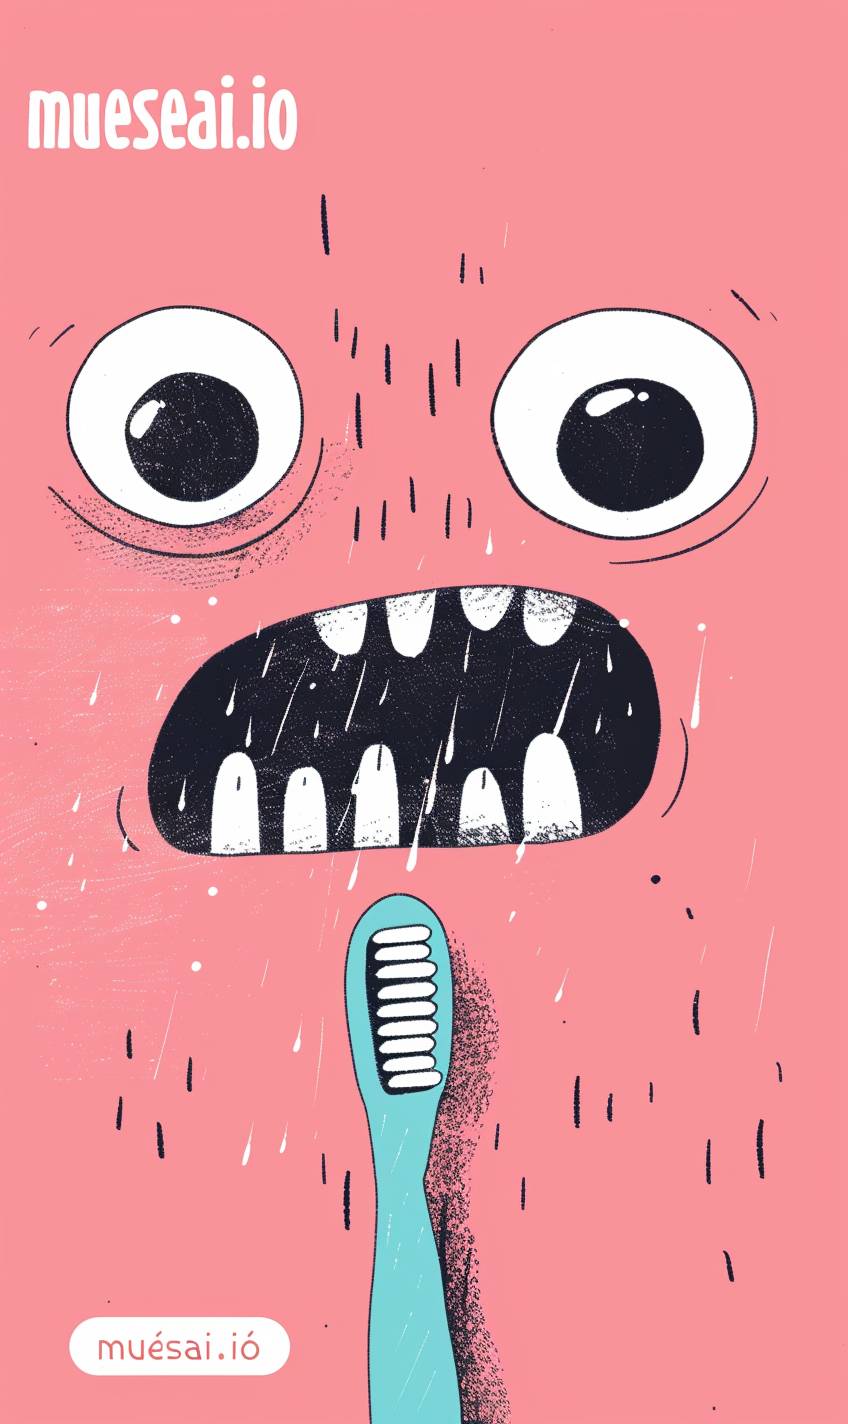 A simple illustration of the text "mueseai.io" with an extreme close up of two black eyes and mouth, a cute pink toothbrush in his open mouth, in the style of Gemma Correll, with a quirky character design and flat pastel colors.